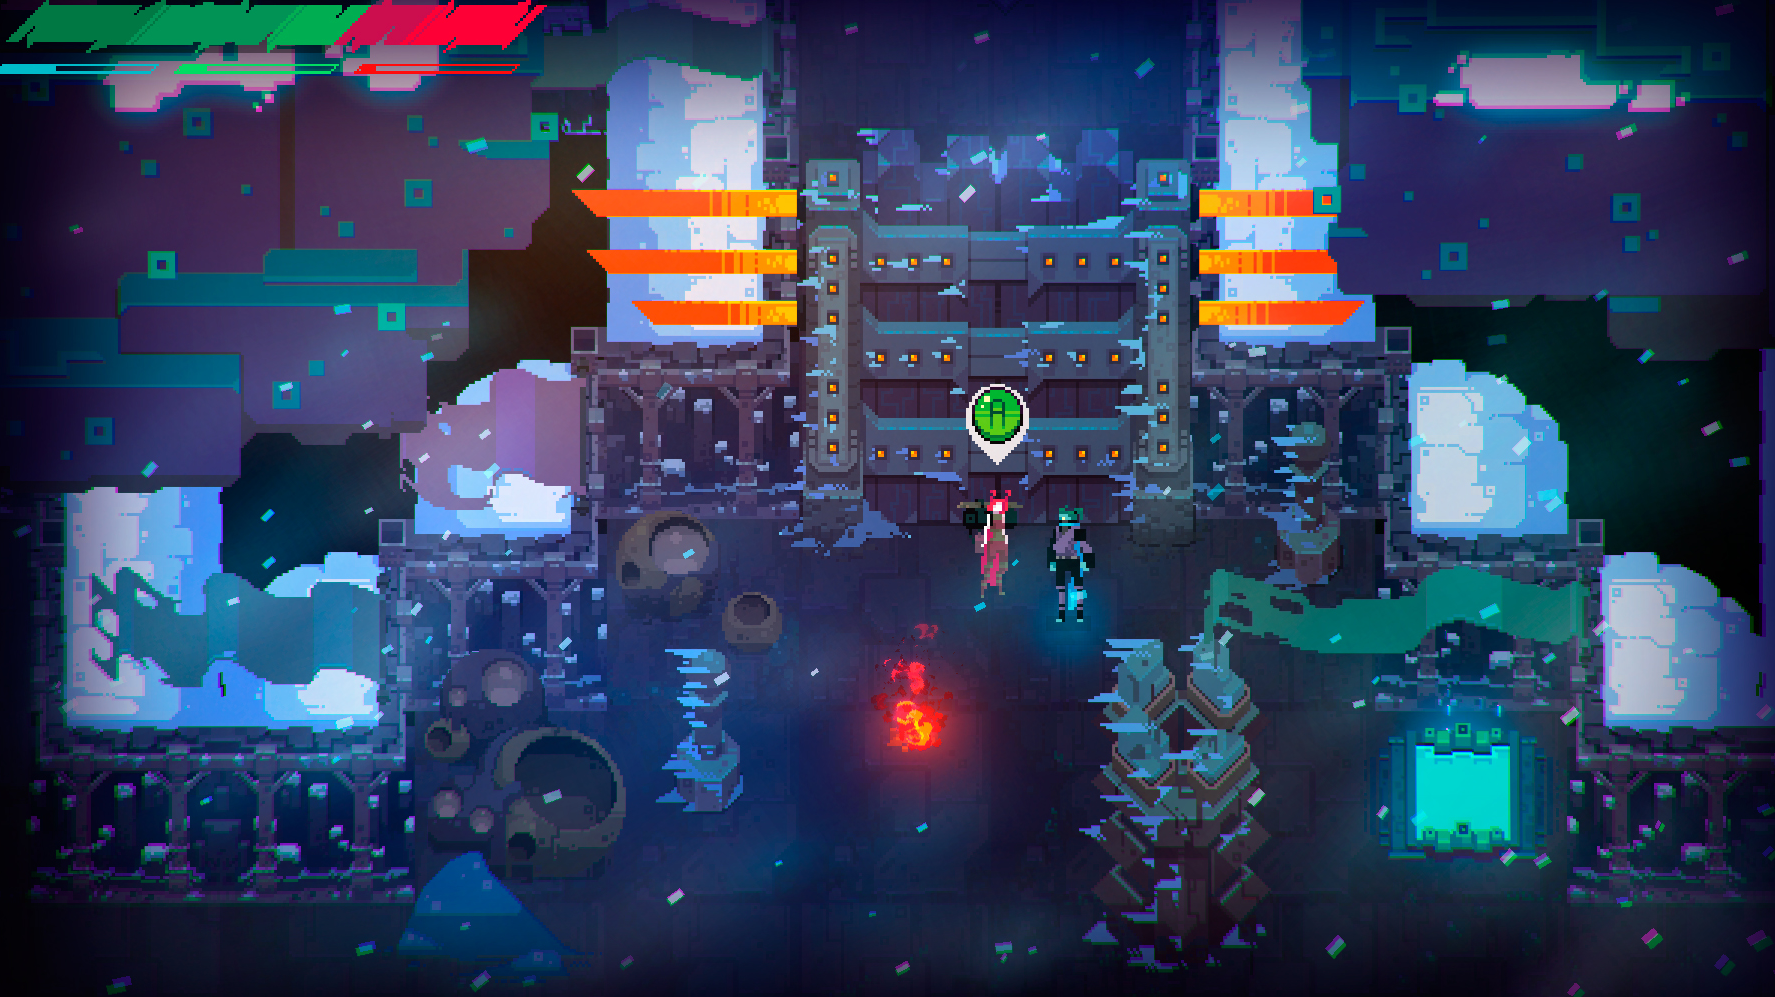 There’s More To Phantom Trigger Than Just Another Beautiful Pixel Brawler